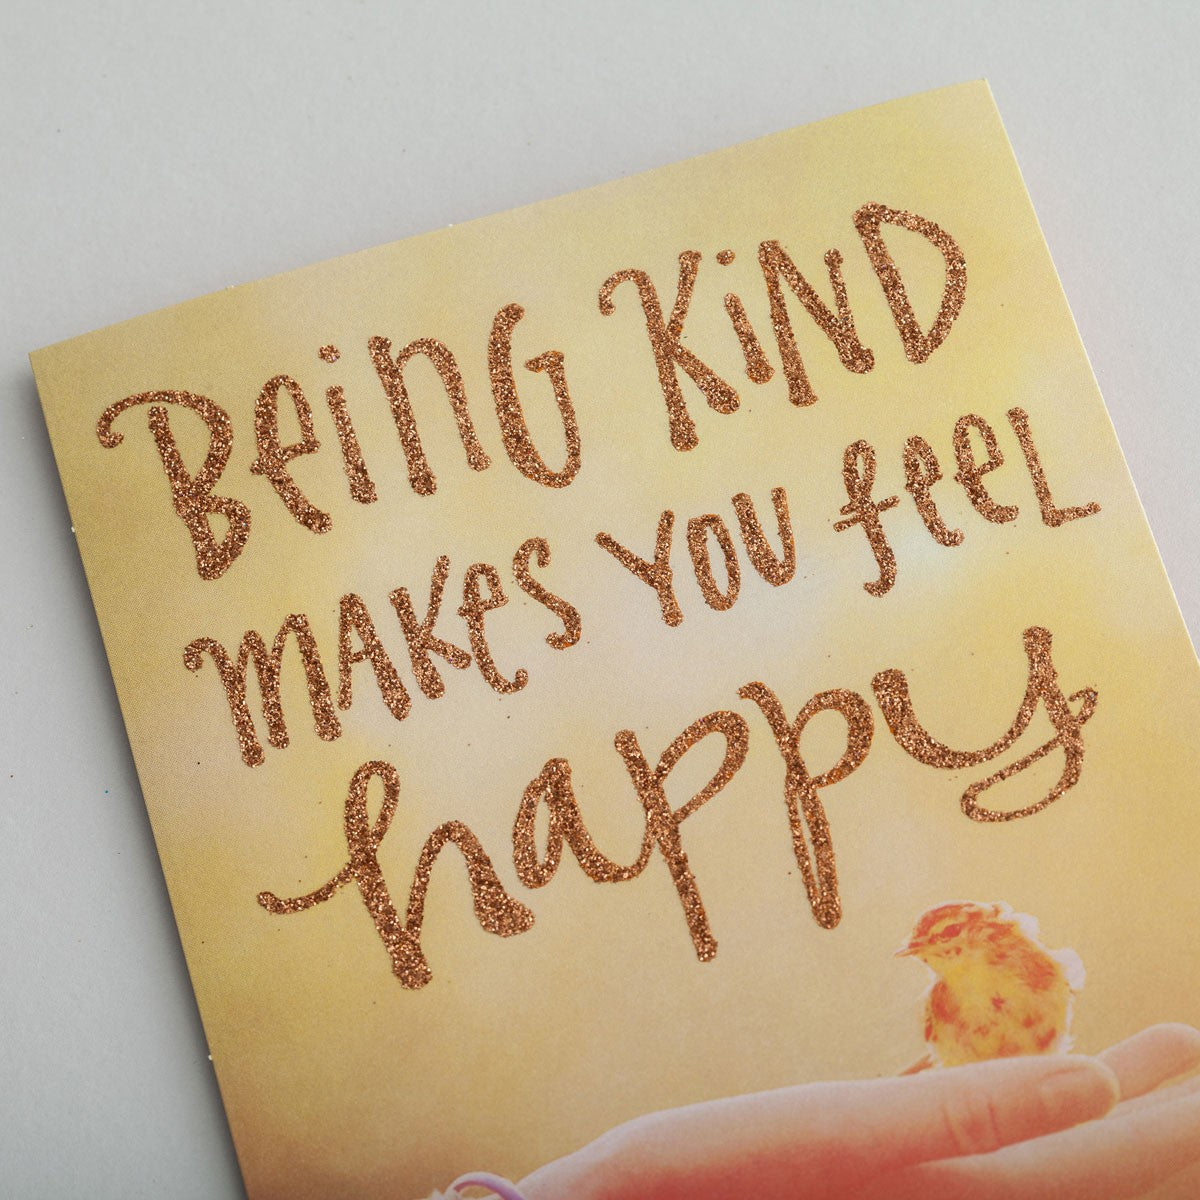 Thank You - Being Kind Card - Southern Grace Creations